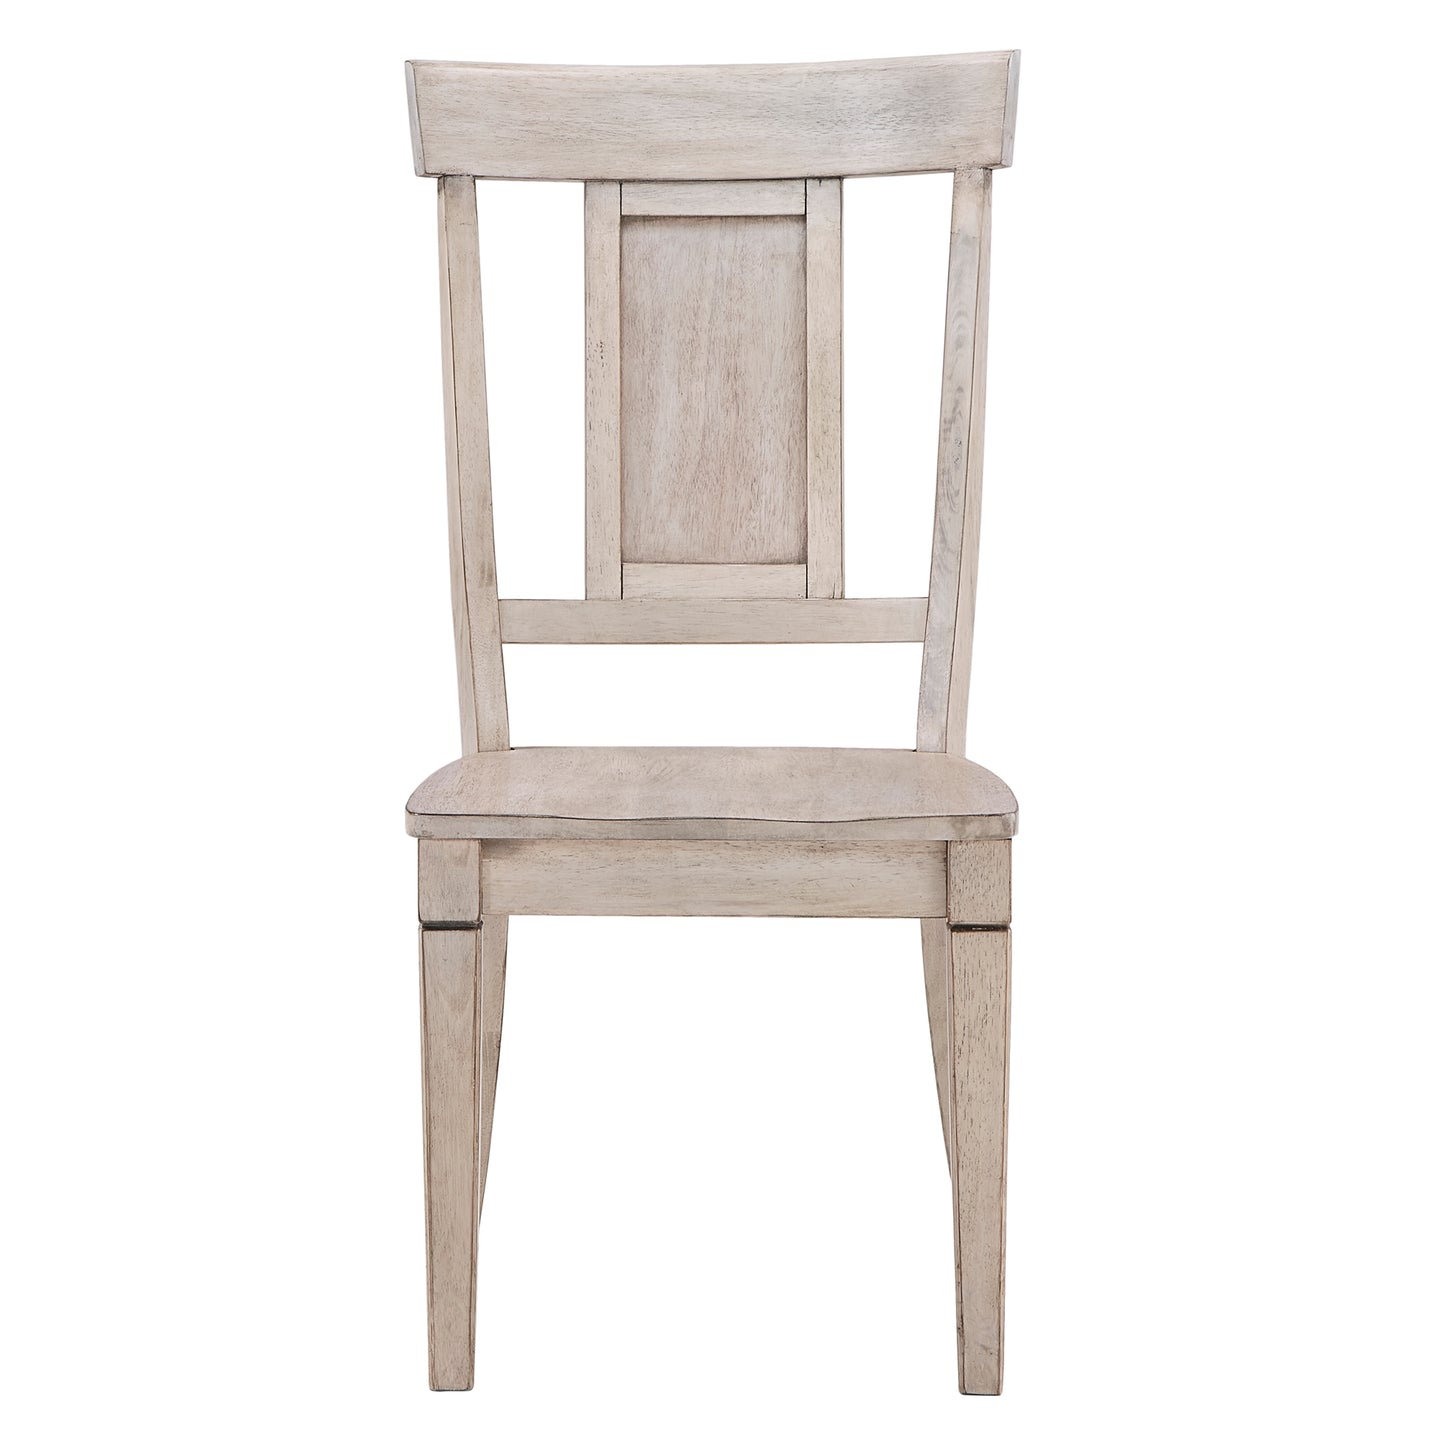 Panel Back Wood Dining Chairs (Set of 2) - Antique White Finish